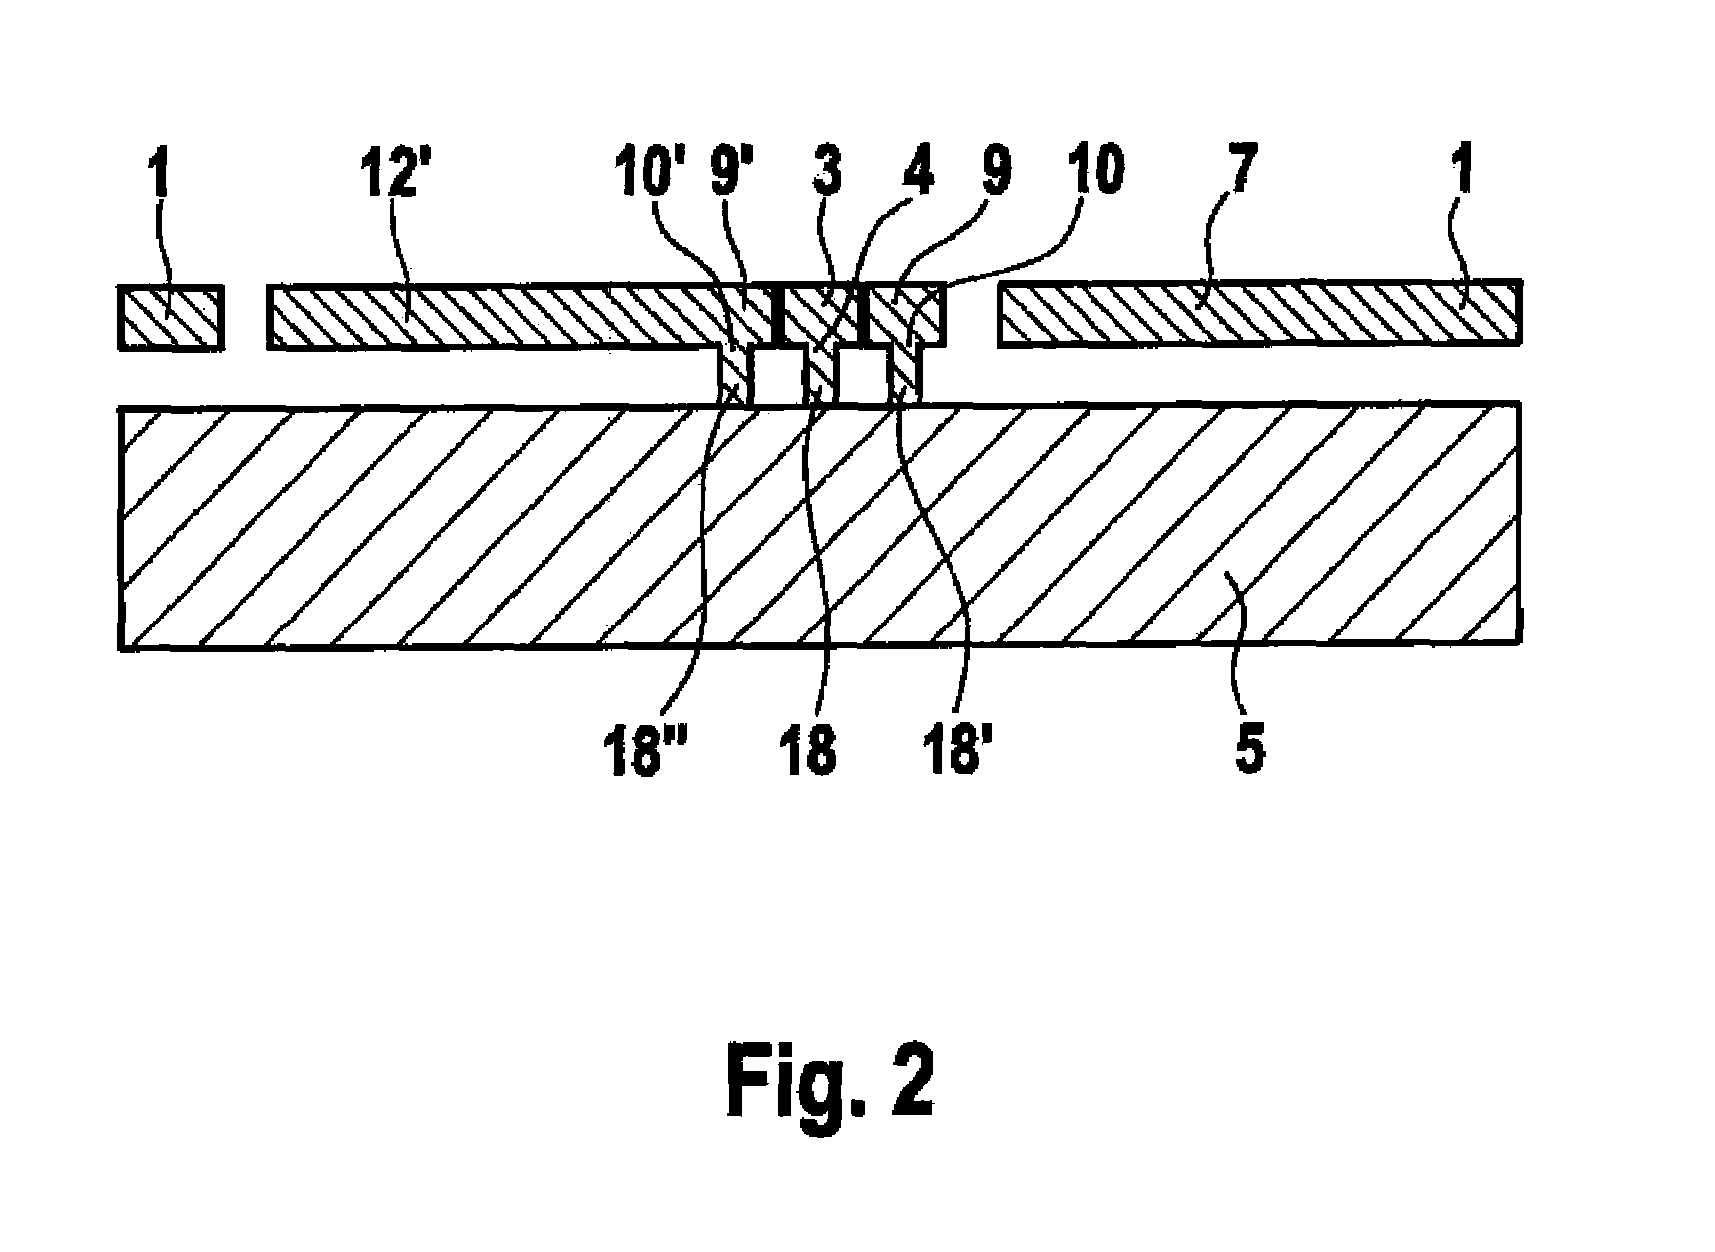 Acceleration sensor with comb-shaped electrodes